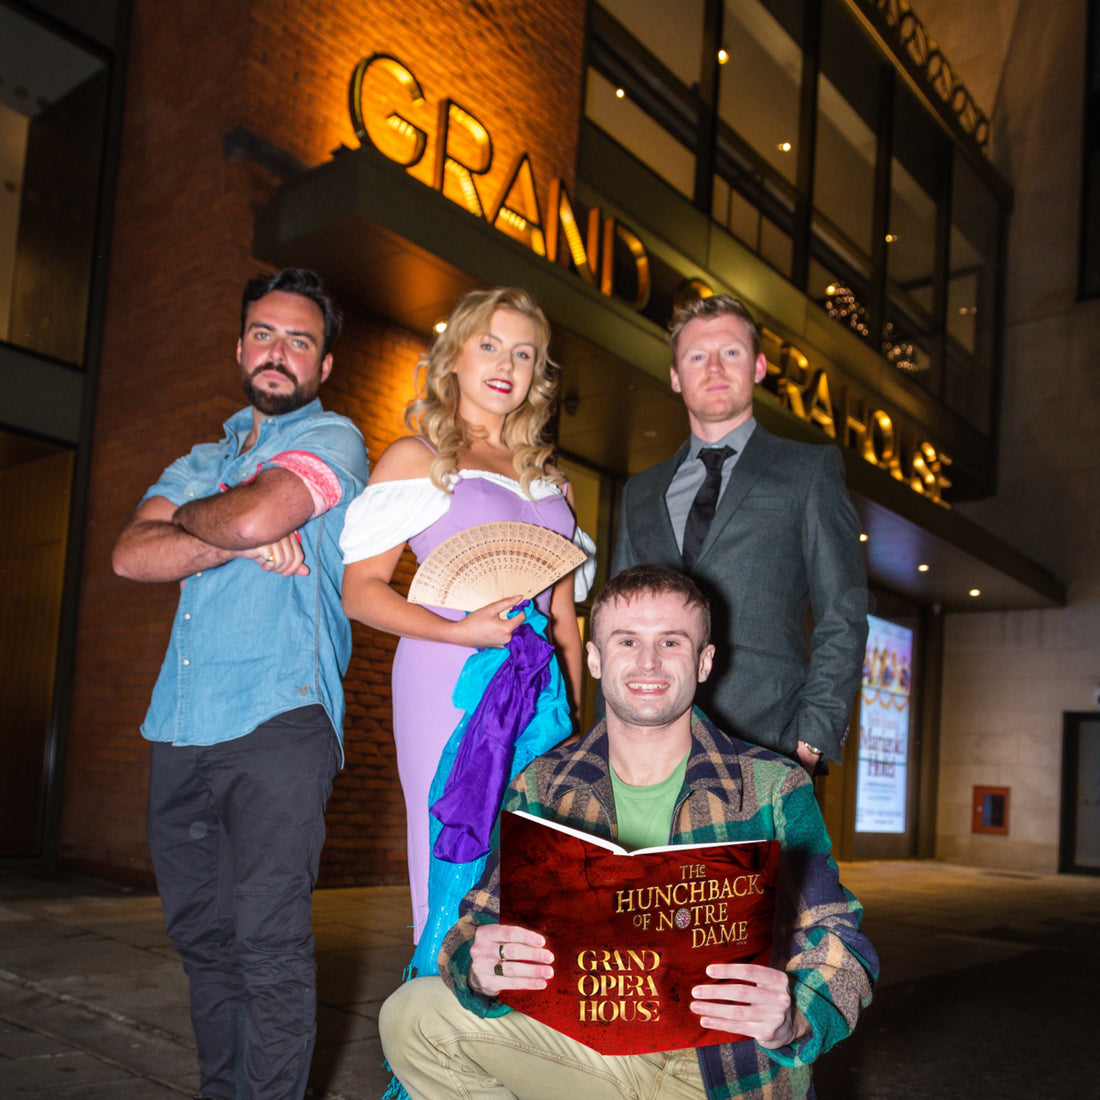 Belfast Operatic Company bring The Hunchback of Notre Dame to the Grand Opera House